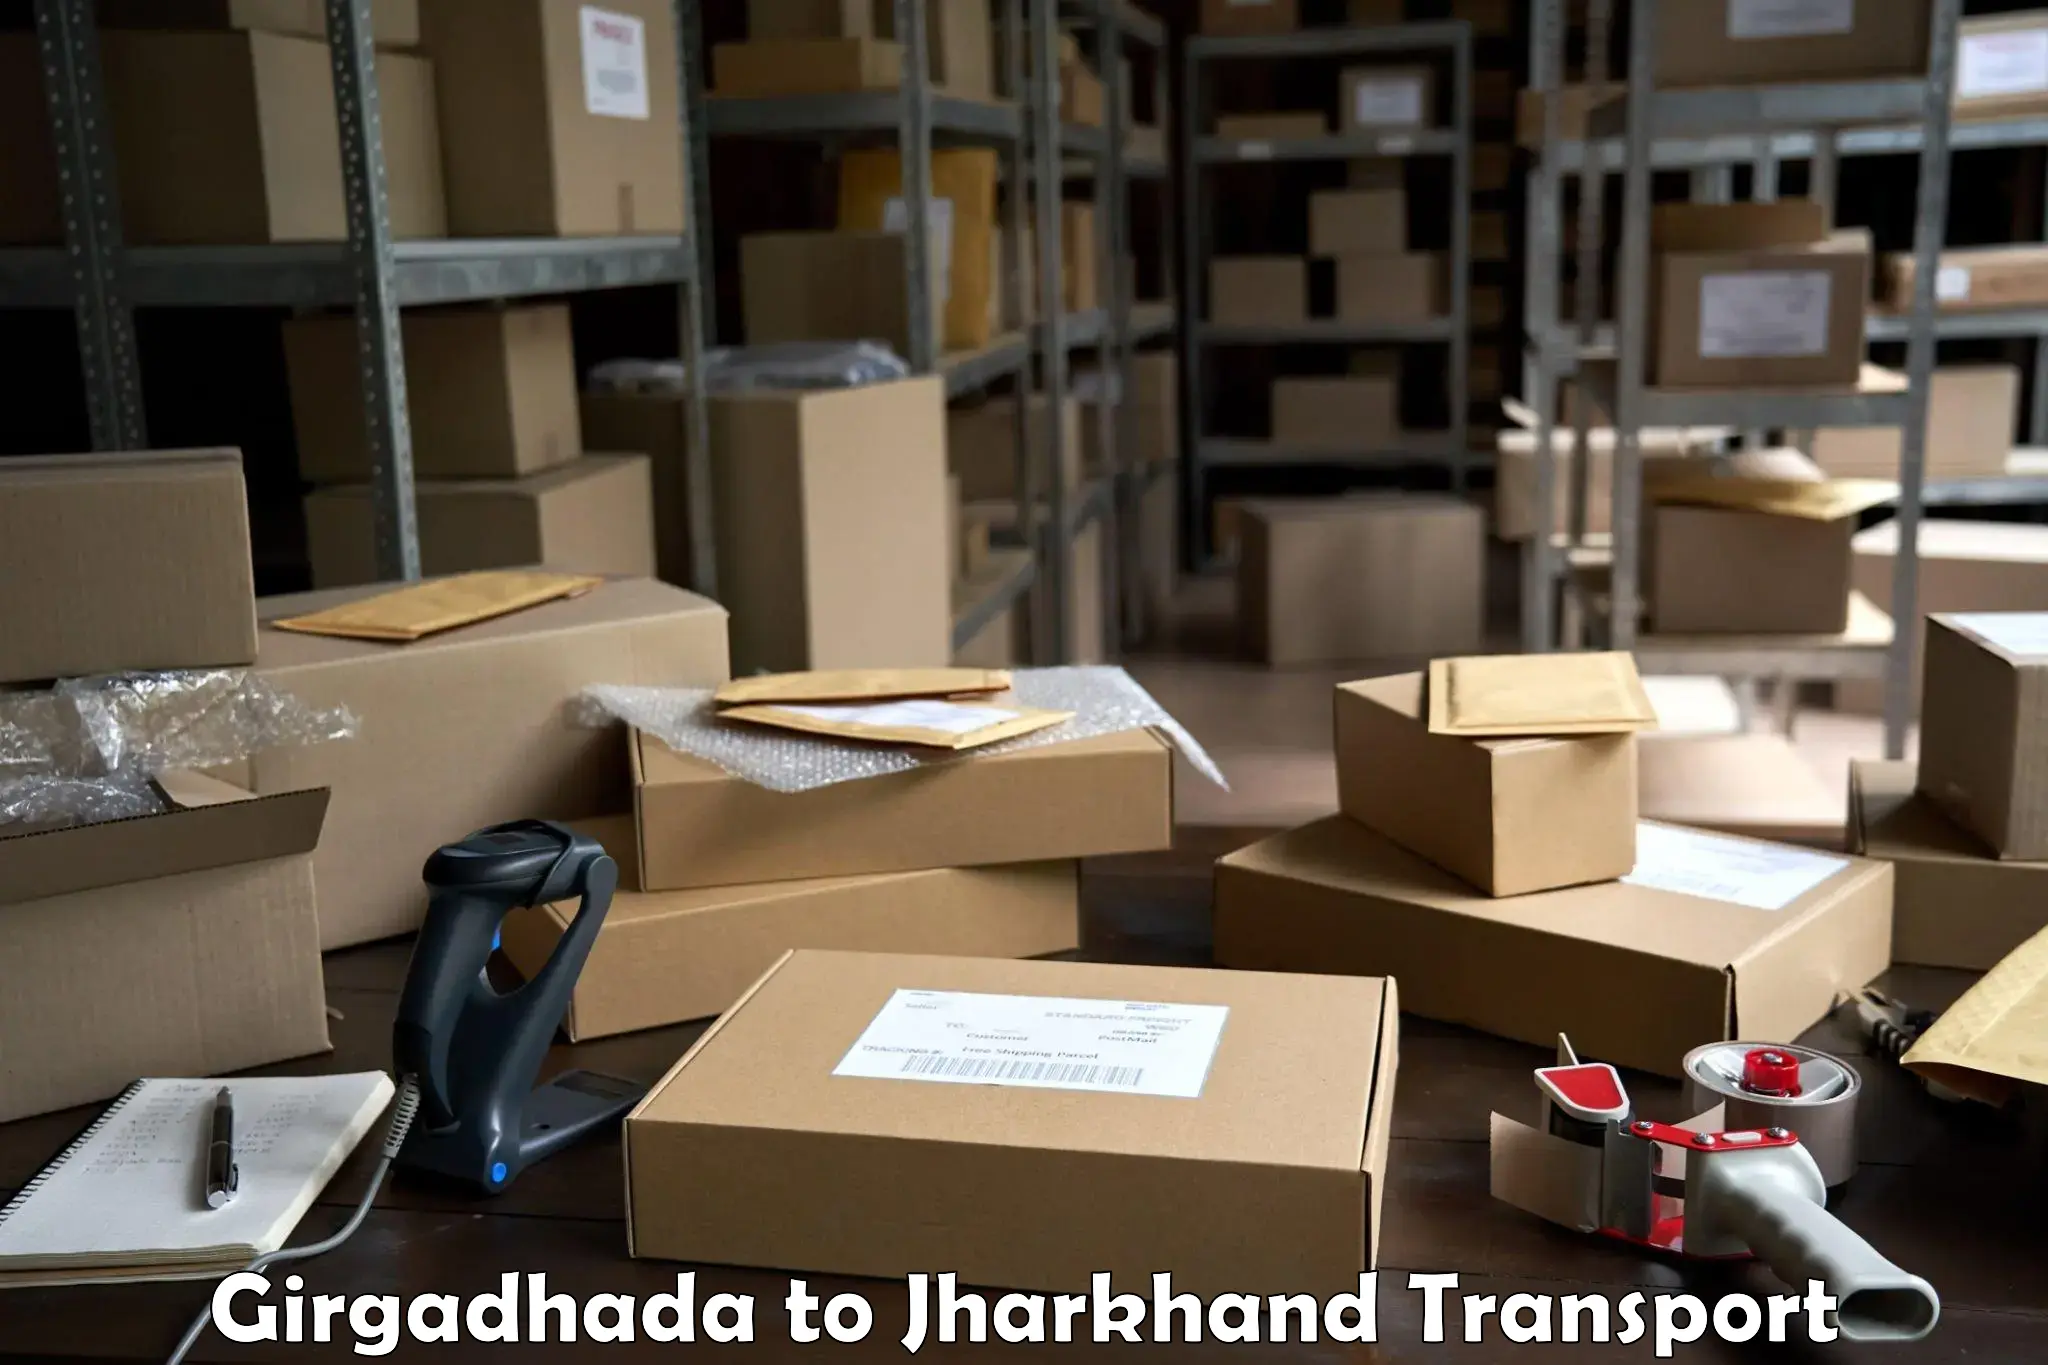 Package delivery services Girgadhada to Ranchi